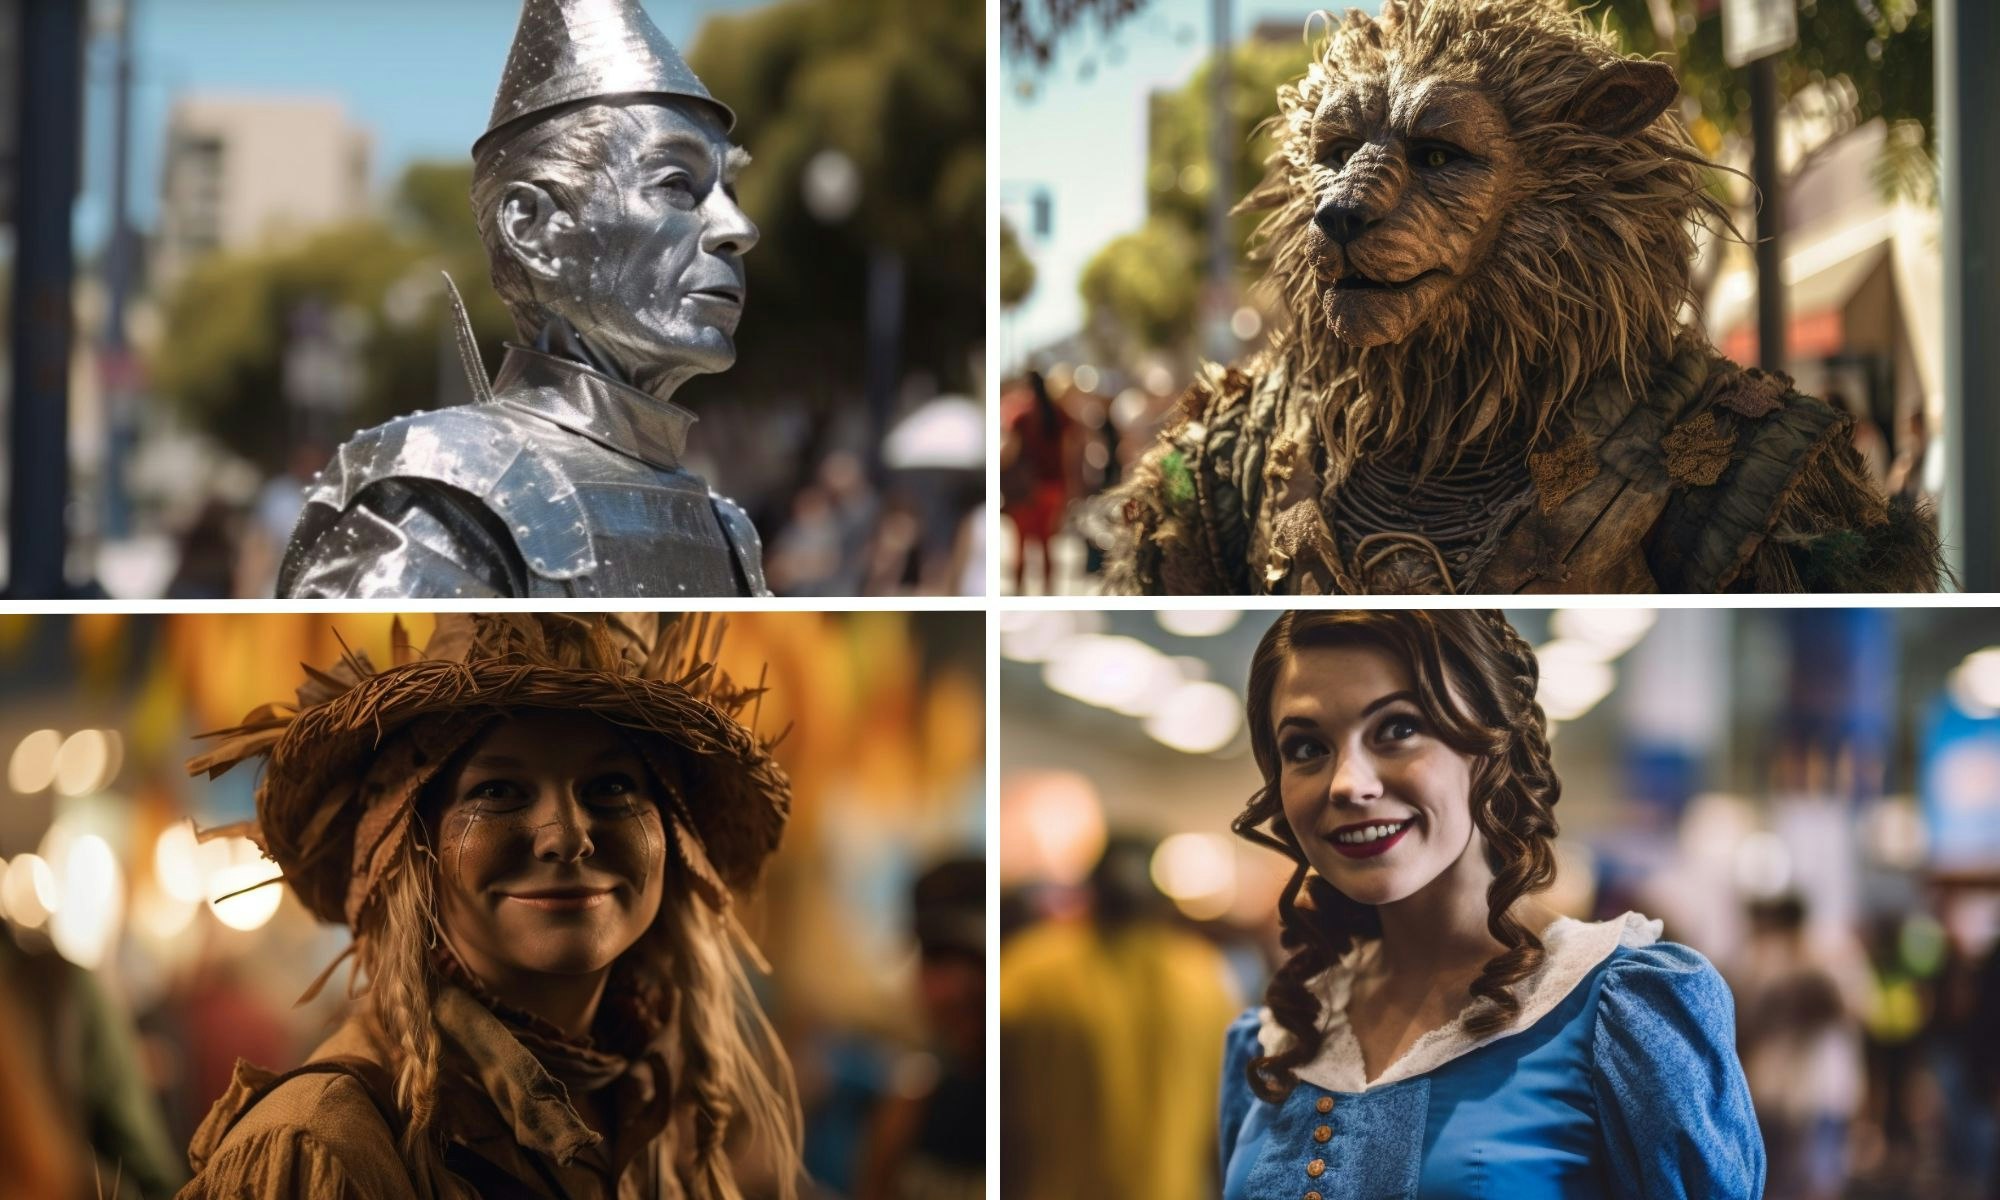 The Wizard of Oz Experience in Gold Coast